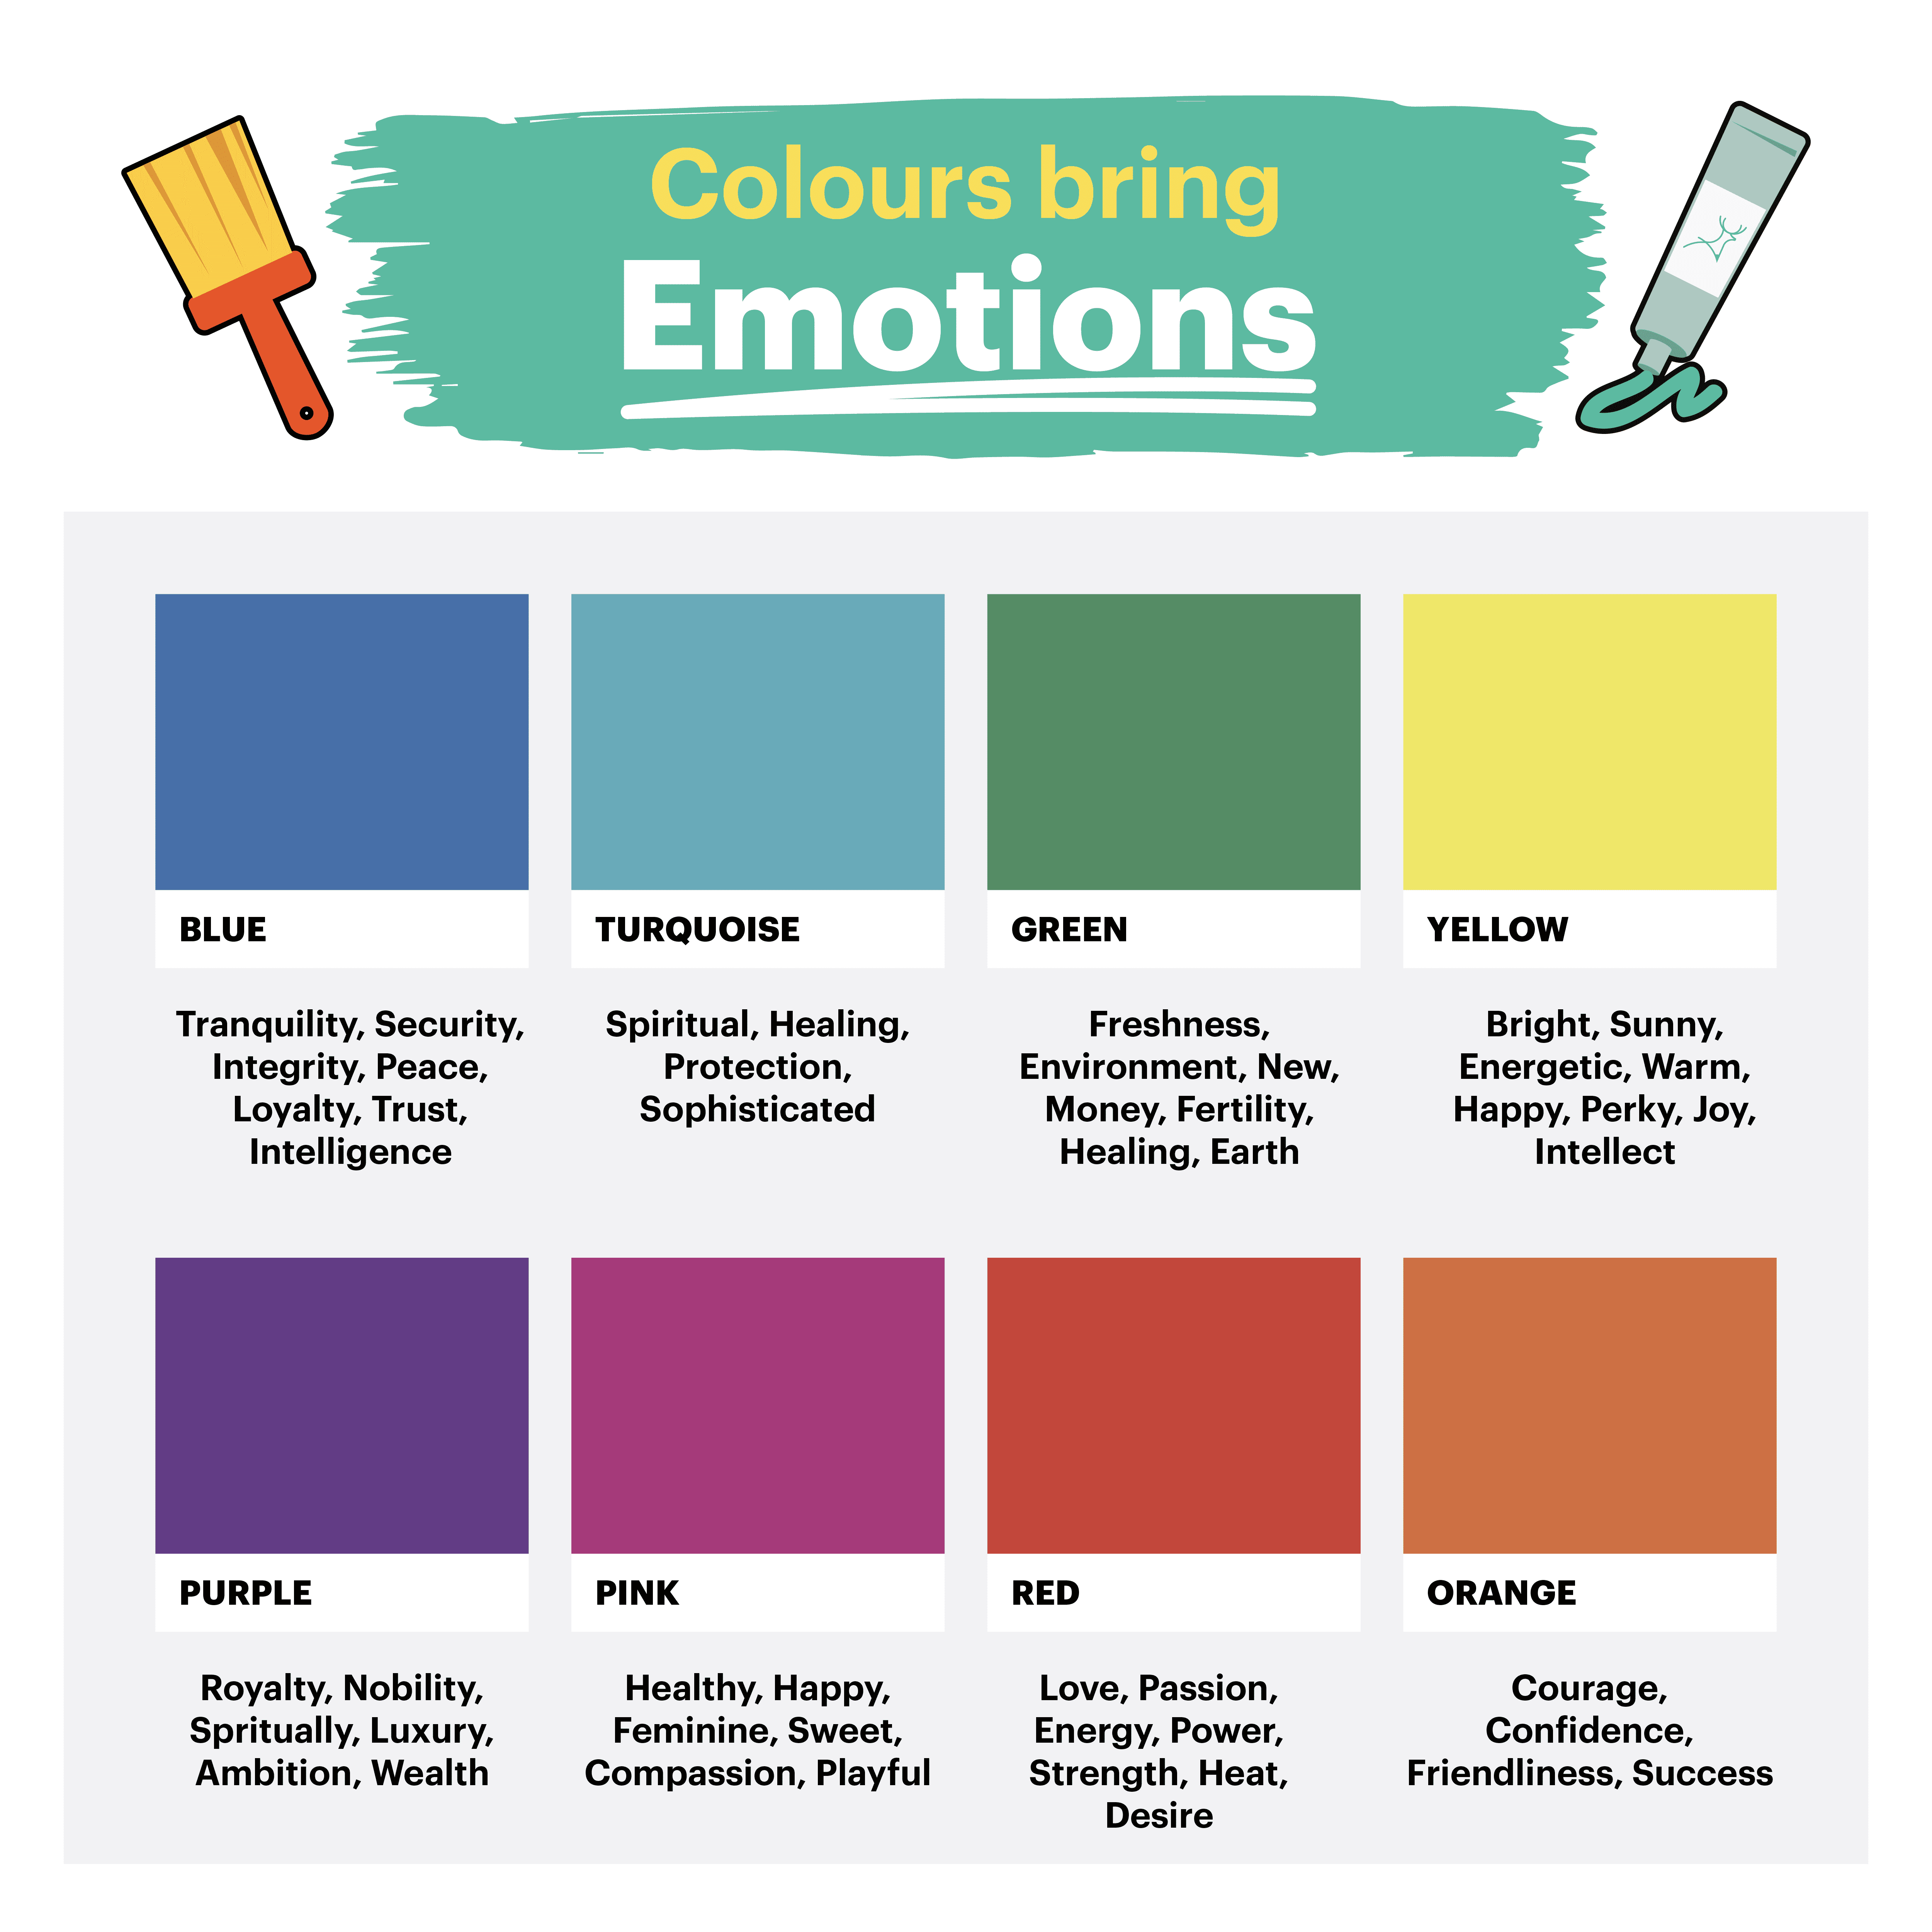 Colours bring emotions